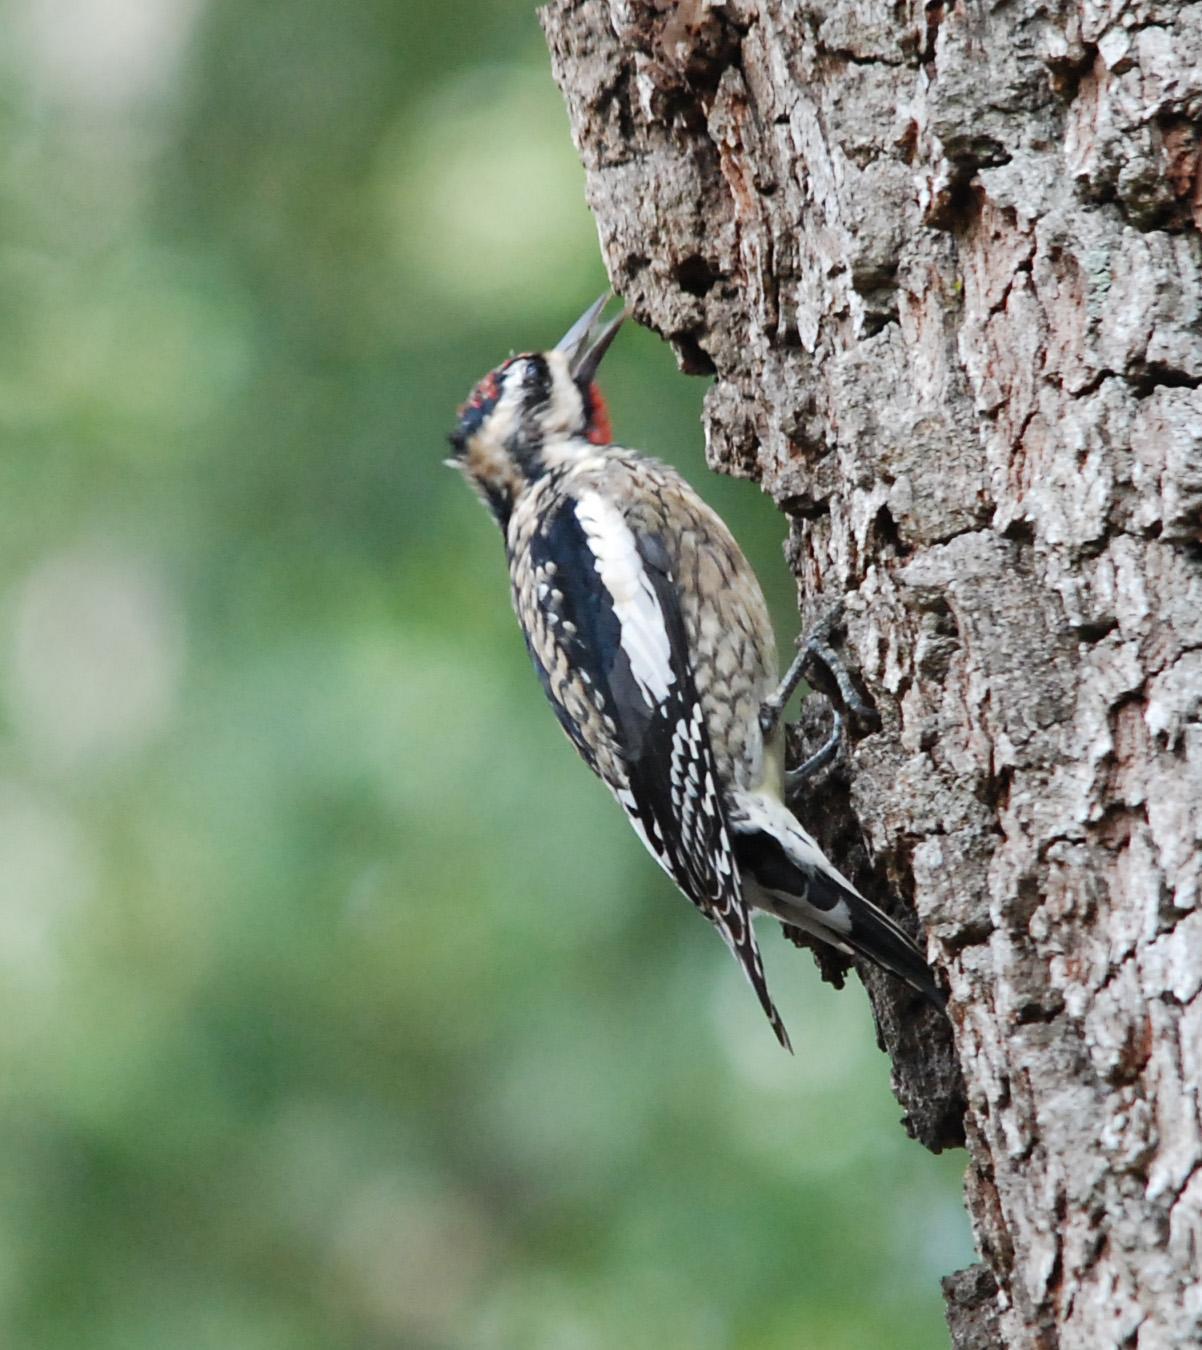 Yellow-bellied Sapsucker Photo by Carol Foil